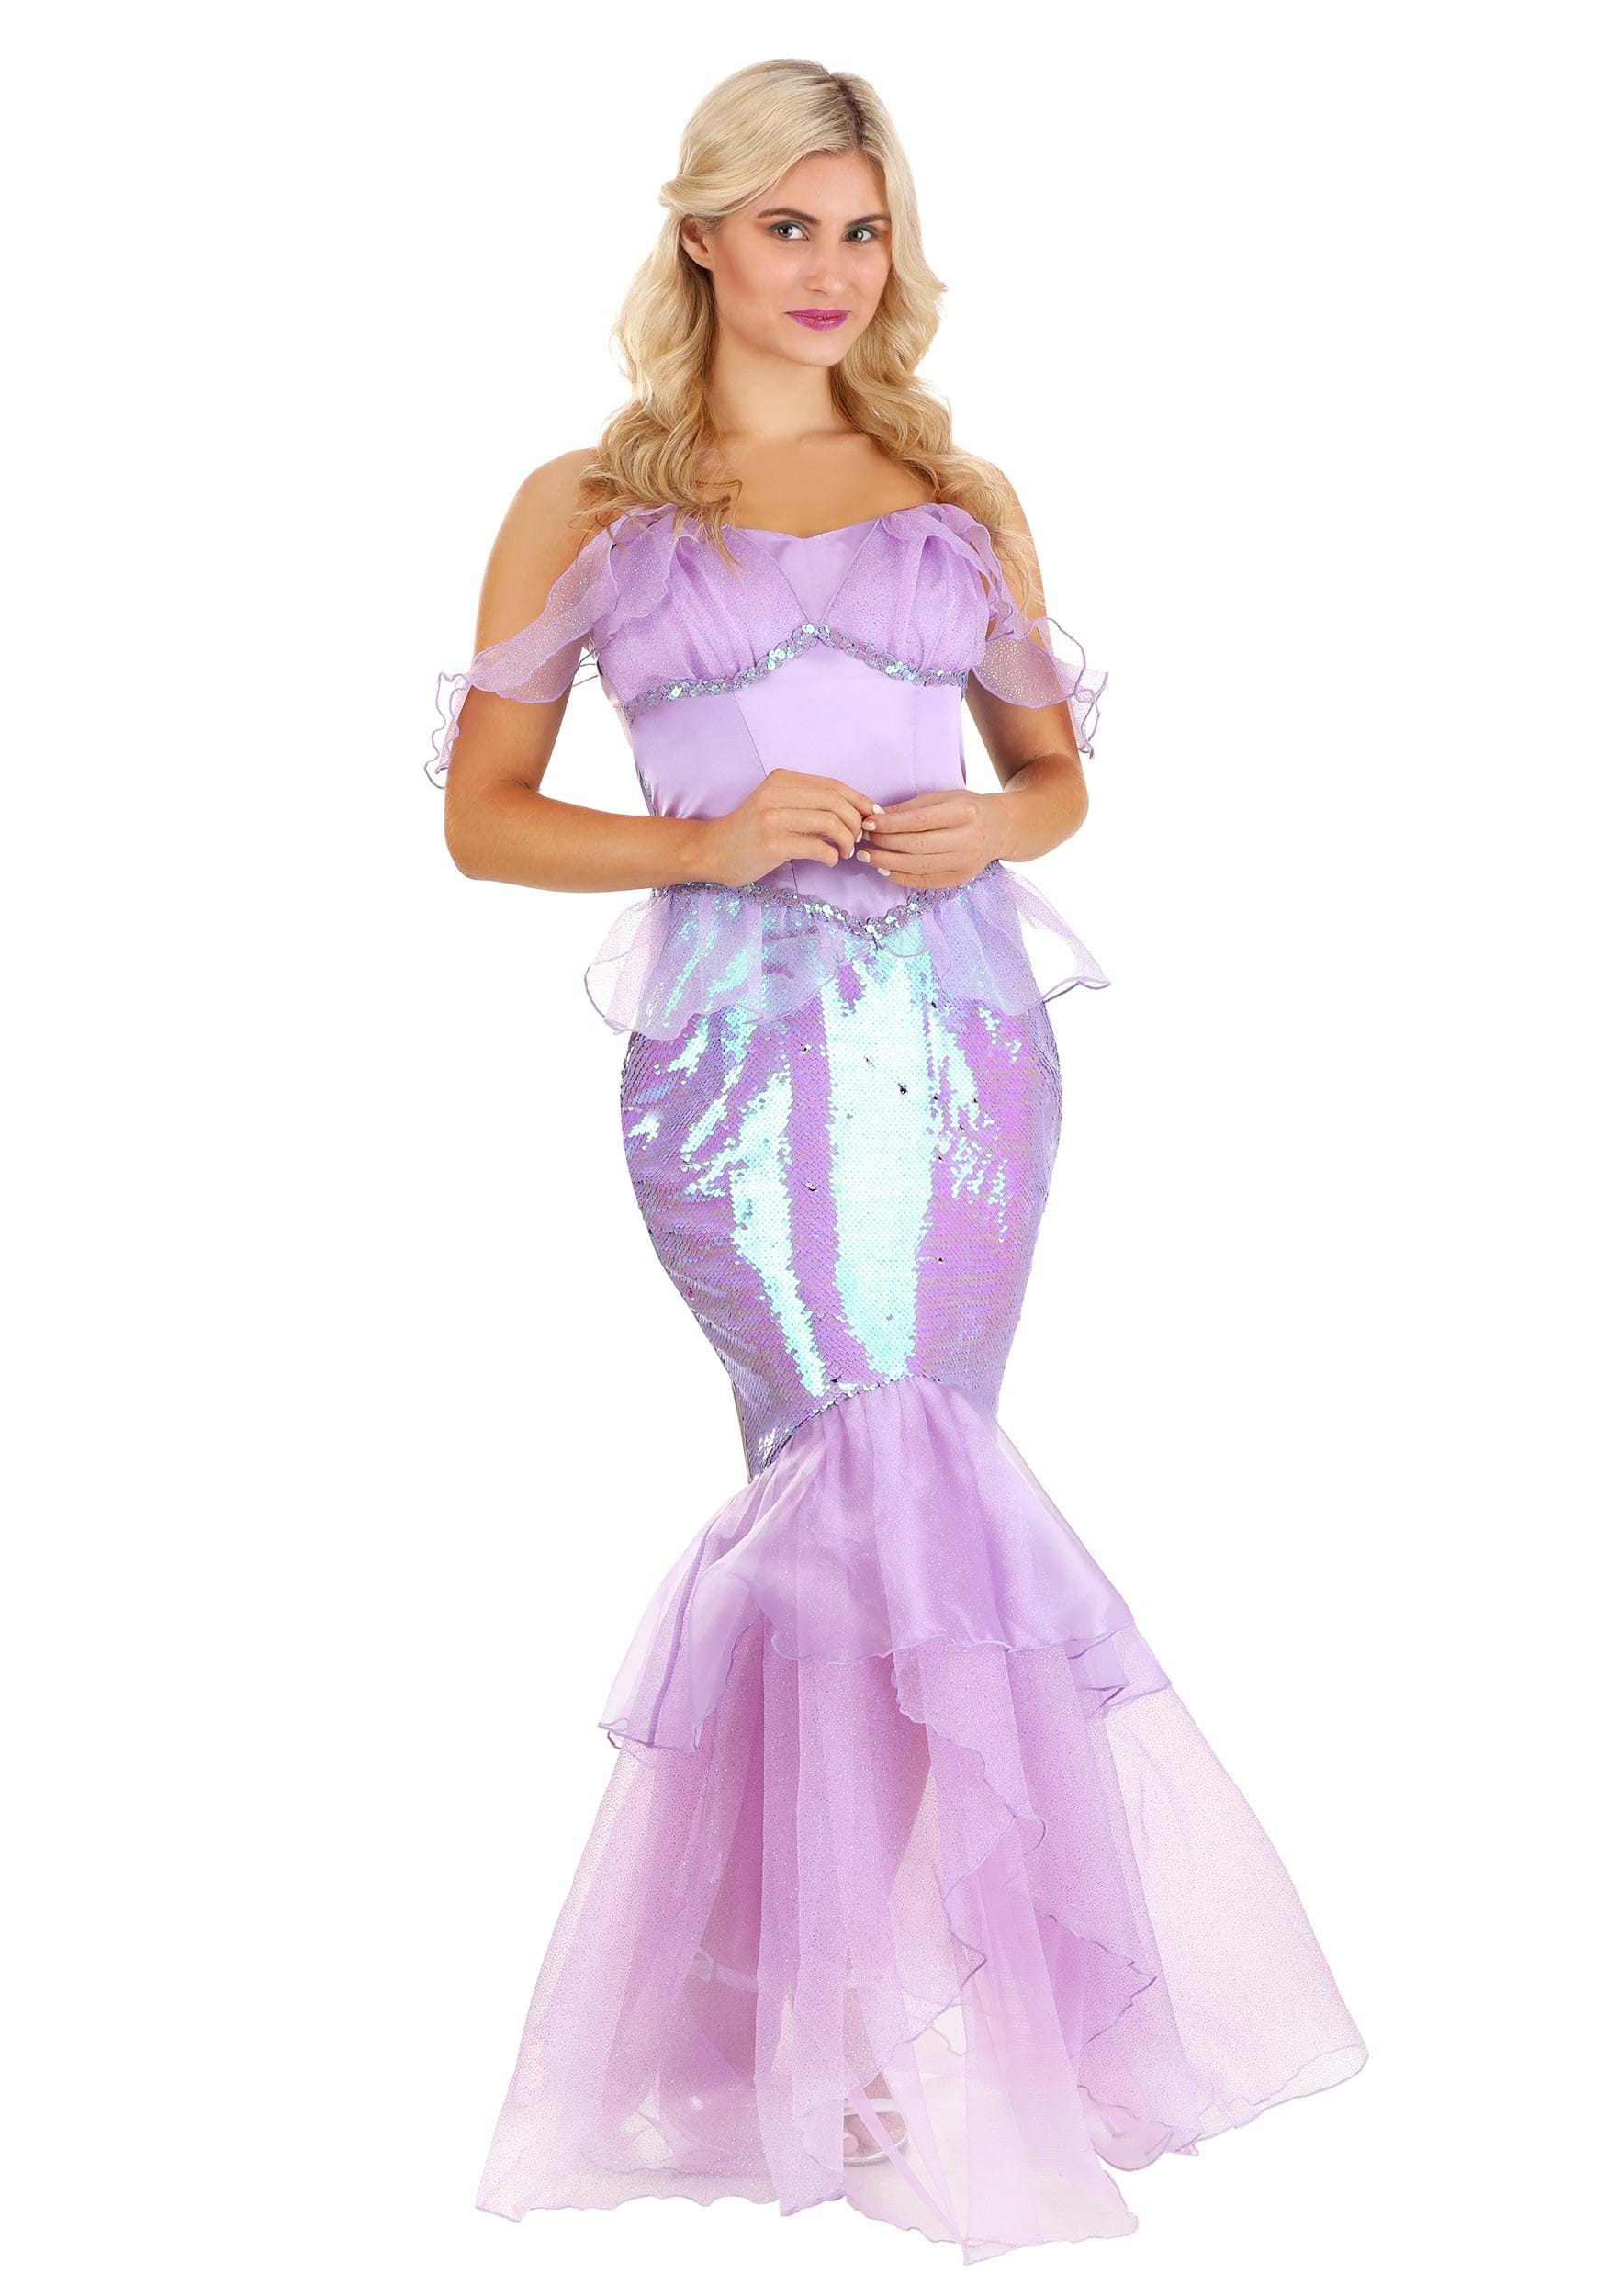 Image of Women's Deluxe Under the Sea Beauty Costume ID FUN4221AD-S